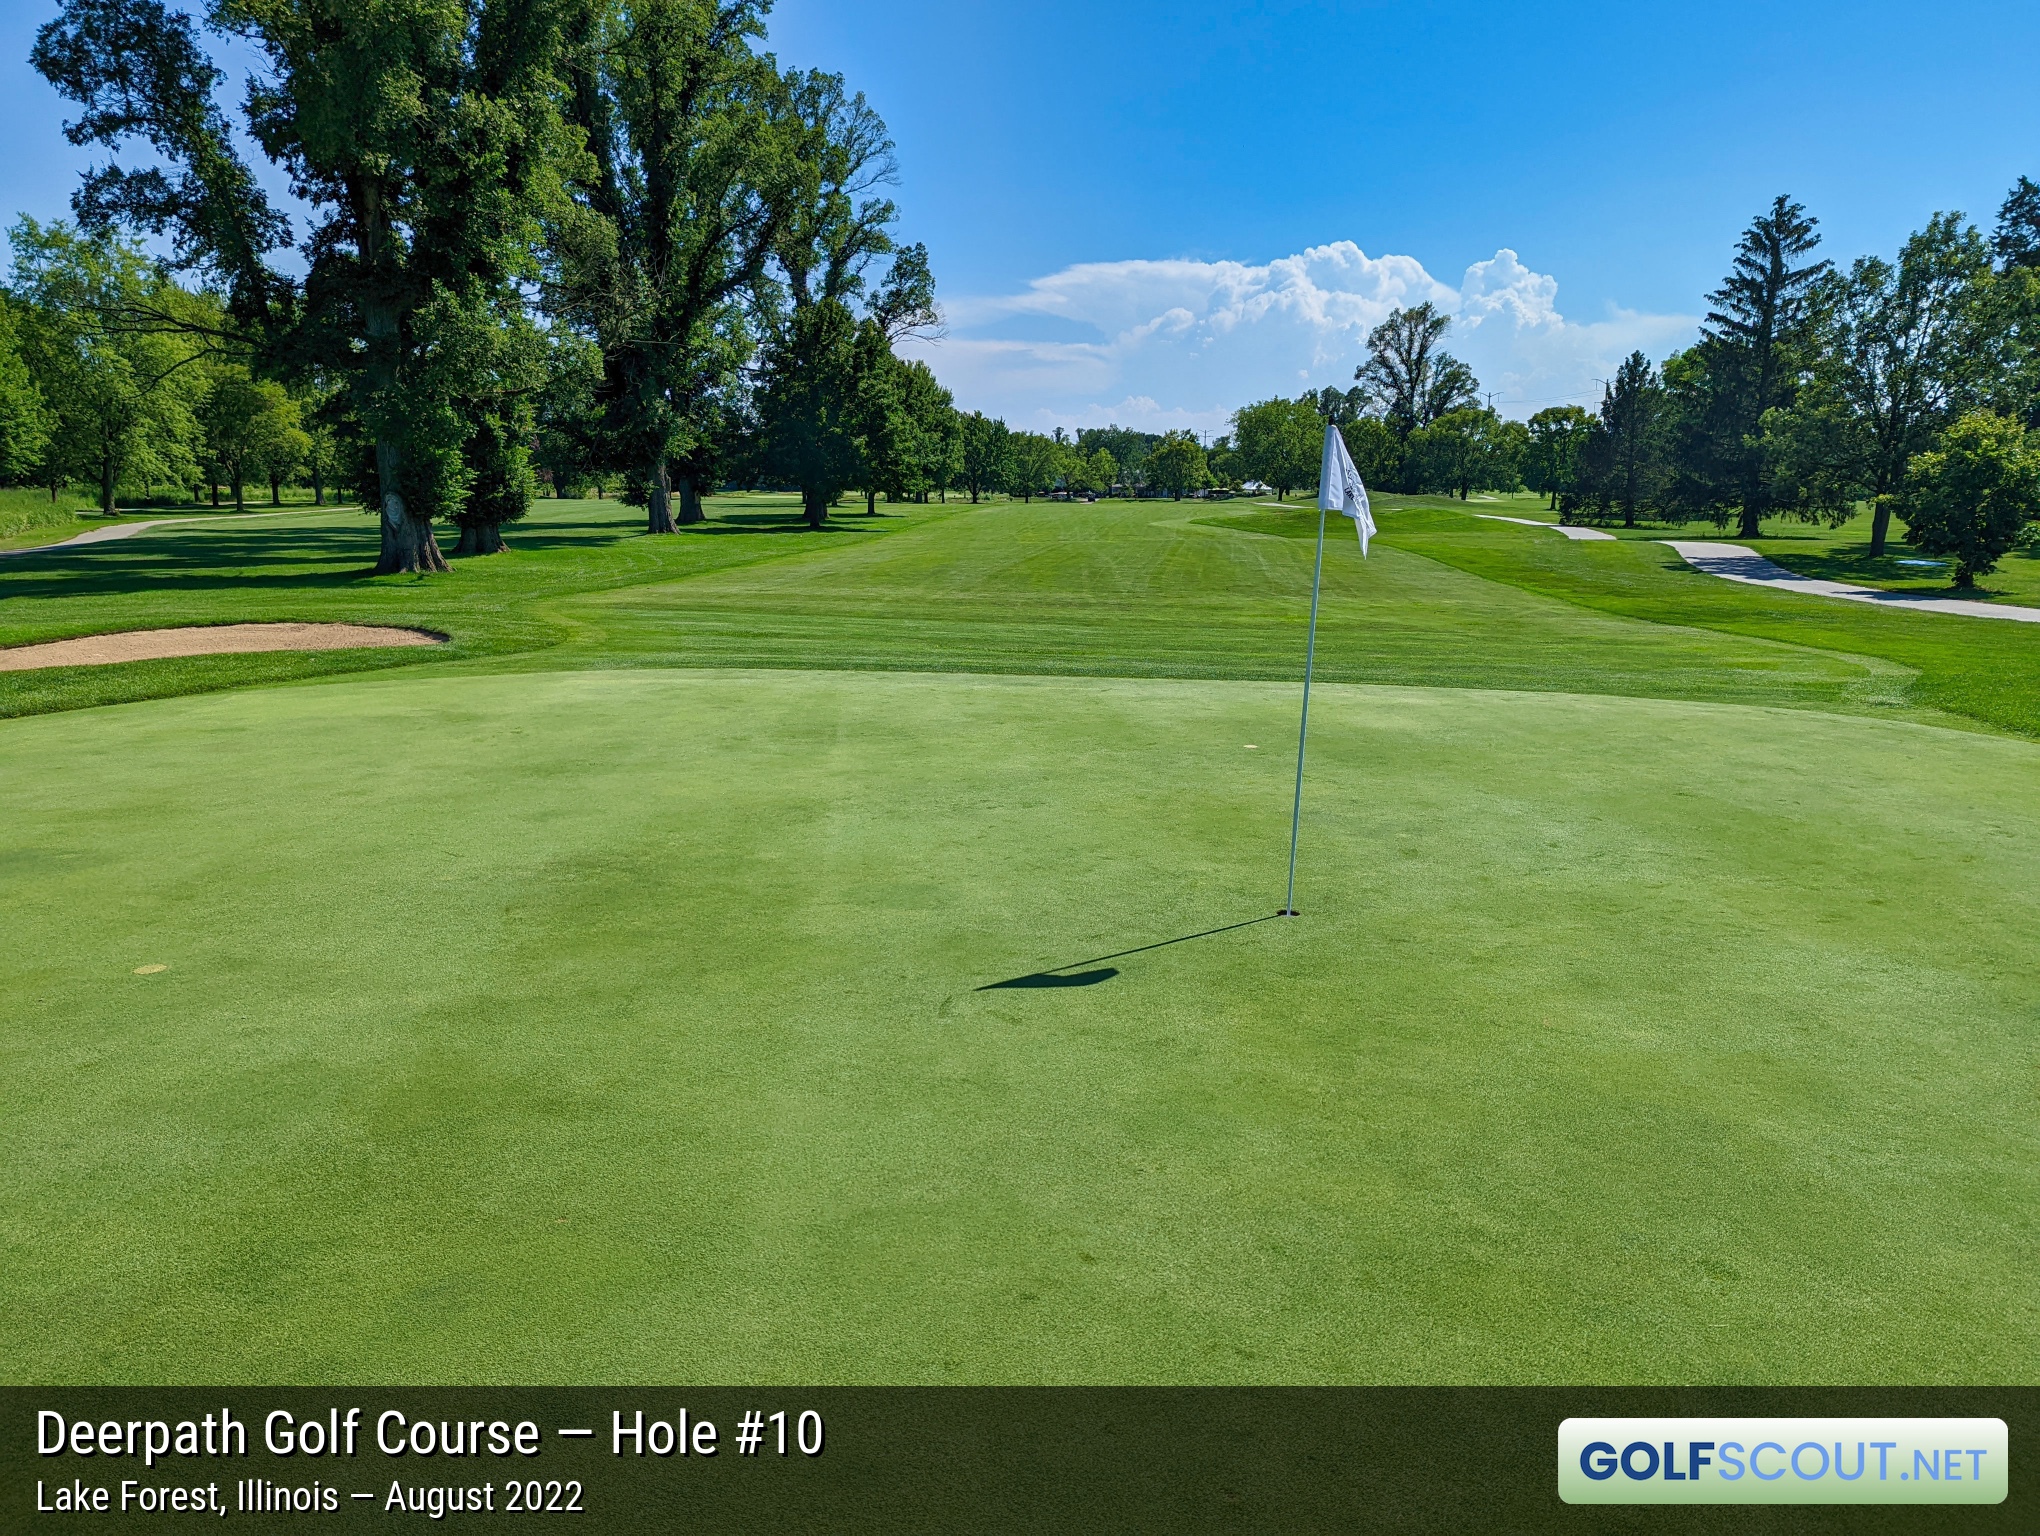 Photo of hole #10 at Deerpath Golf Course in Lake Forest, Illinois. 